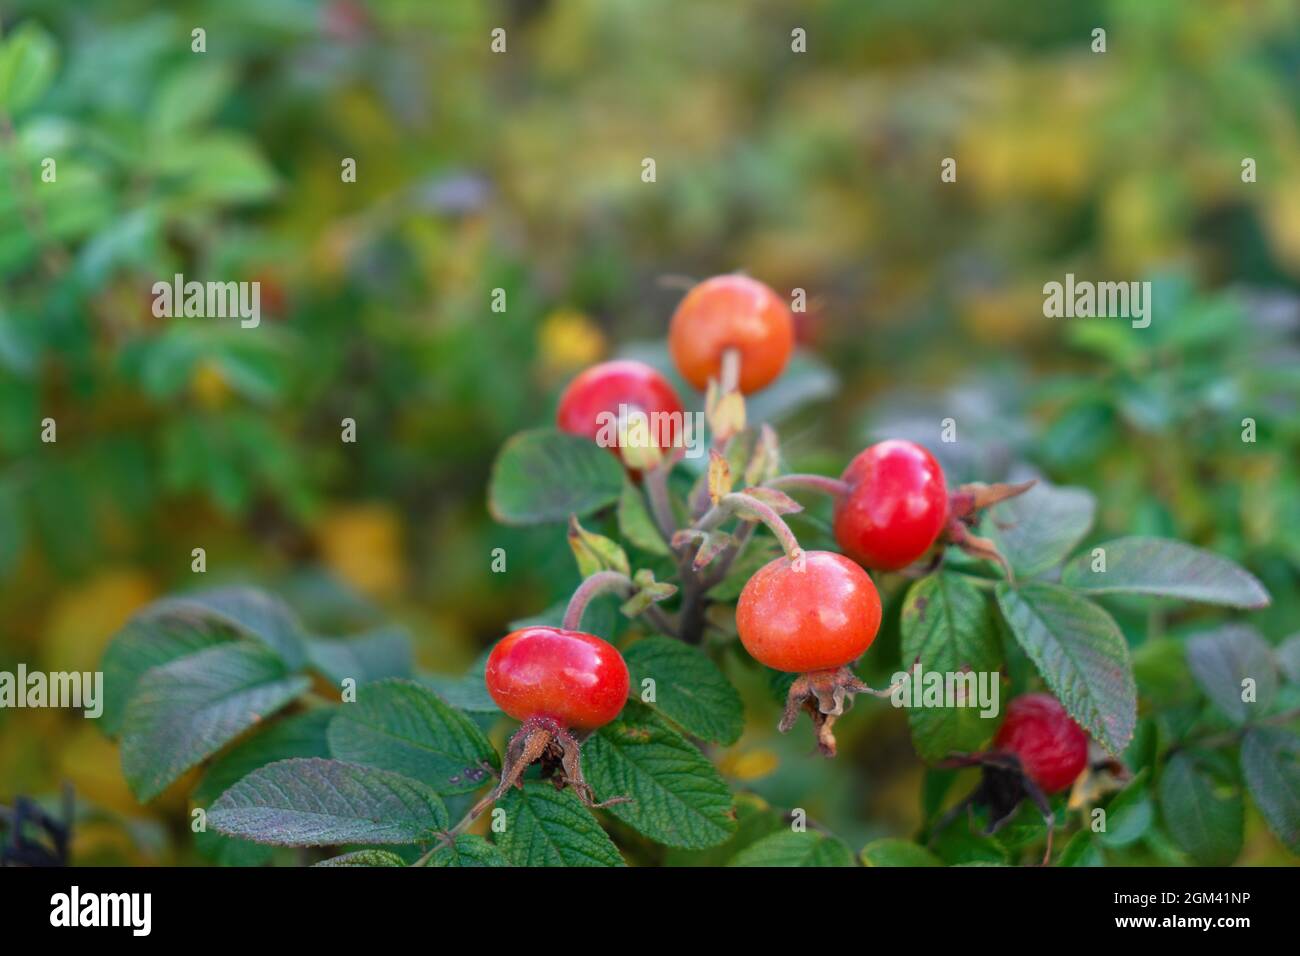 Ripe red rose hips grow on a bush in the garden close up. The concept of healthy herbal tea, alternative medicine, natural vitamin C. Stock Photo